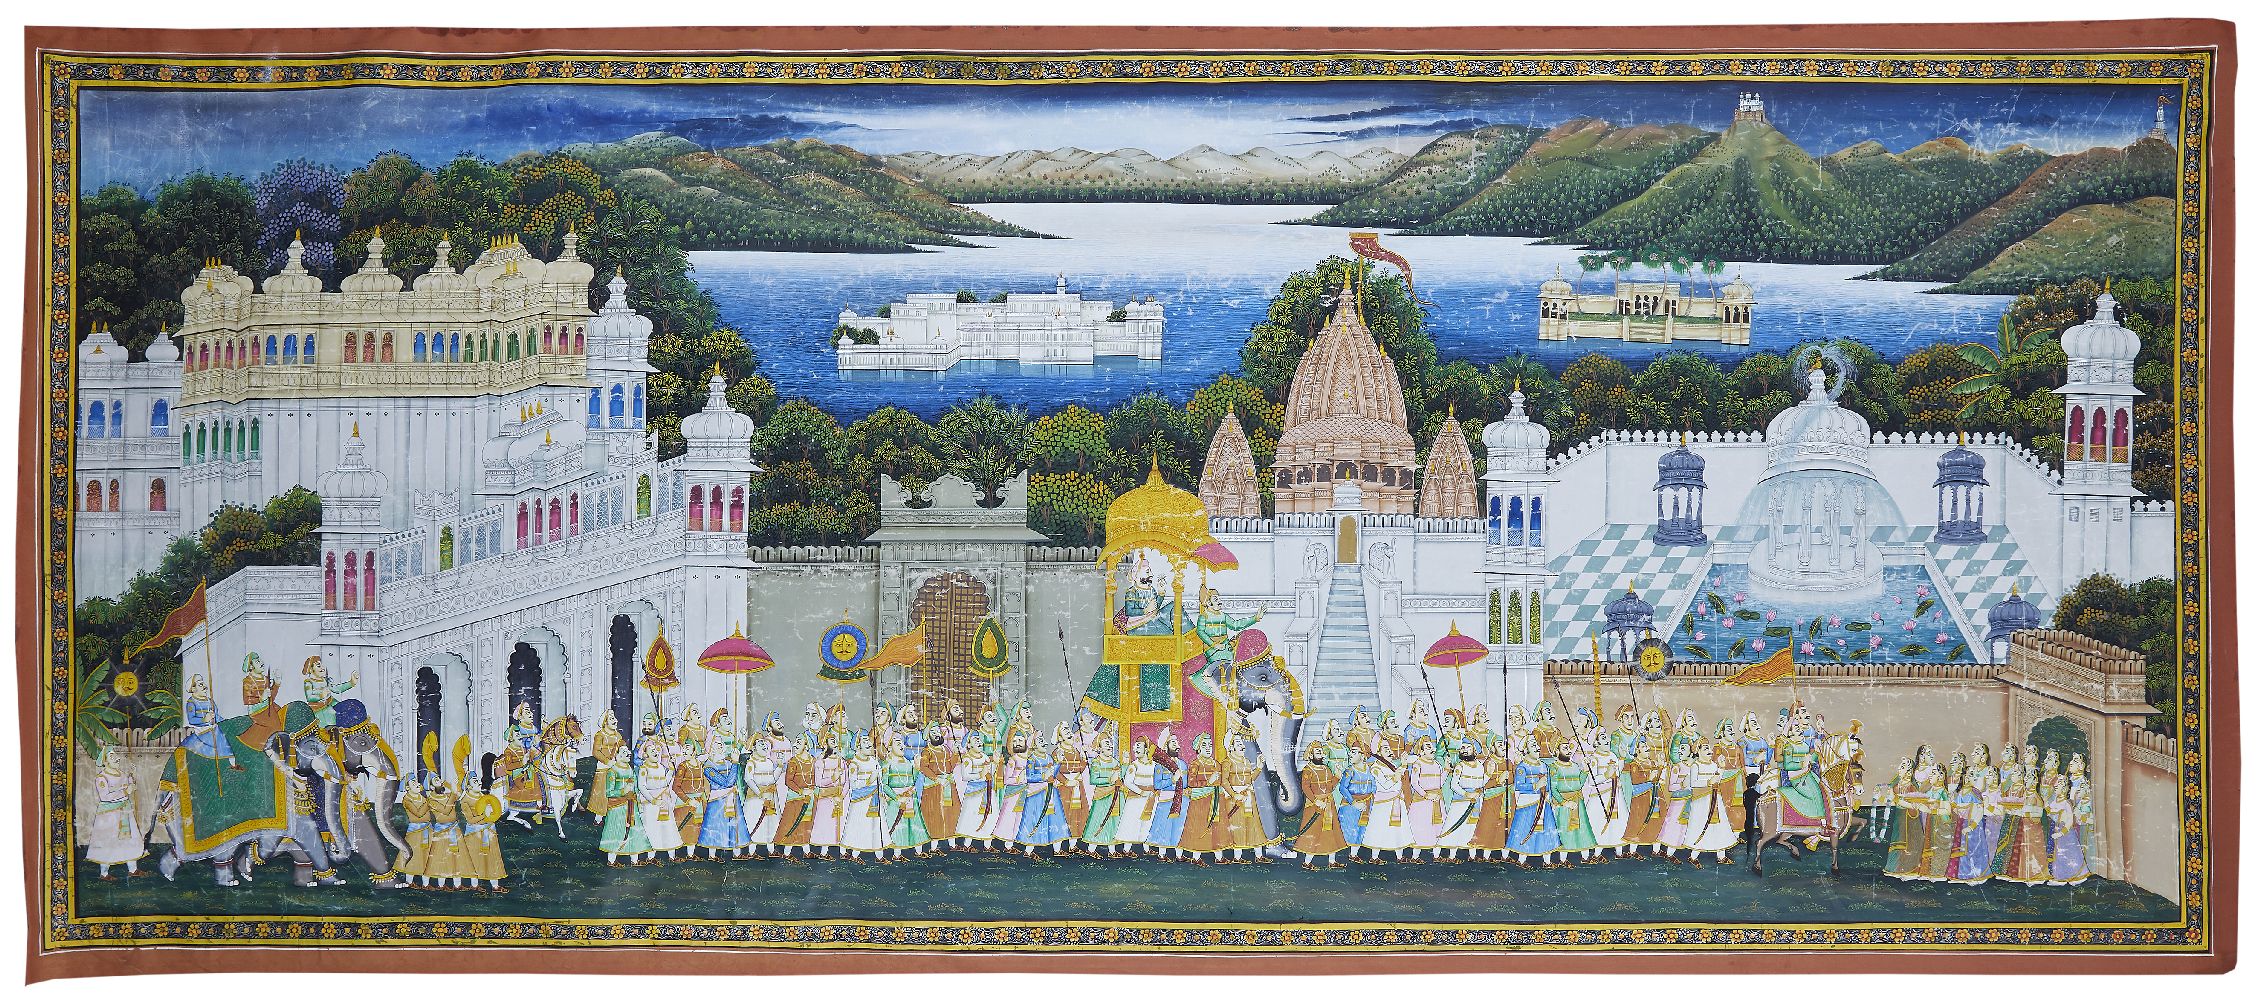 A large painting on cloth of a procession, India, 20th century, 184 by 78 cmPlease refer to